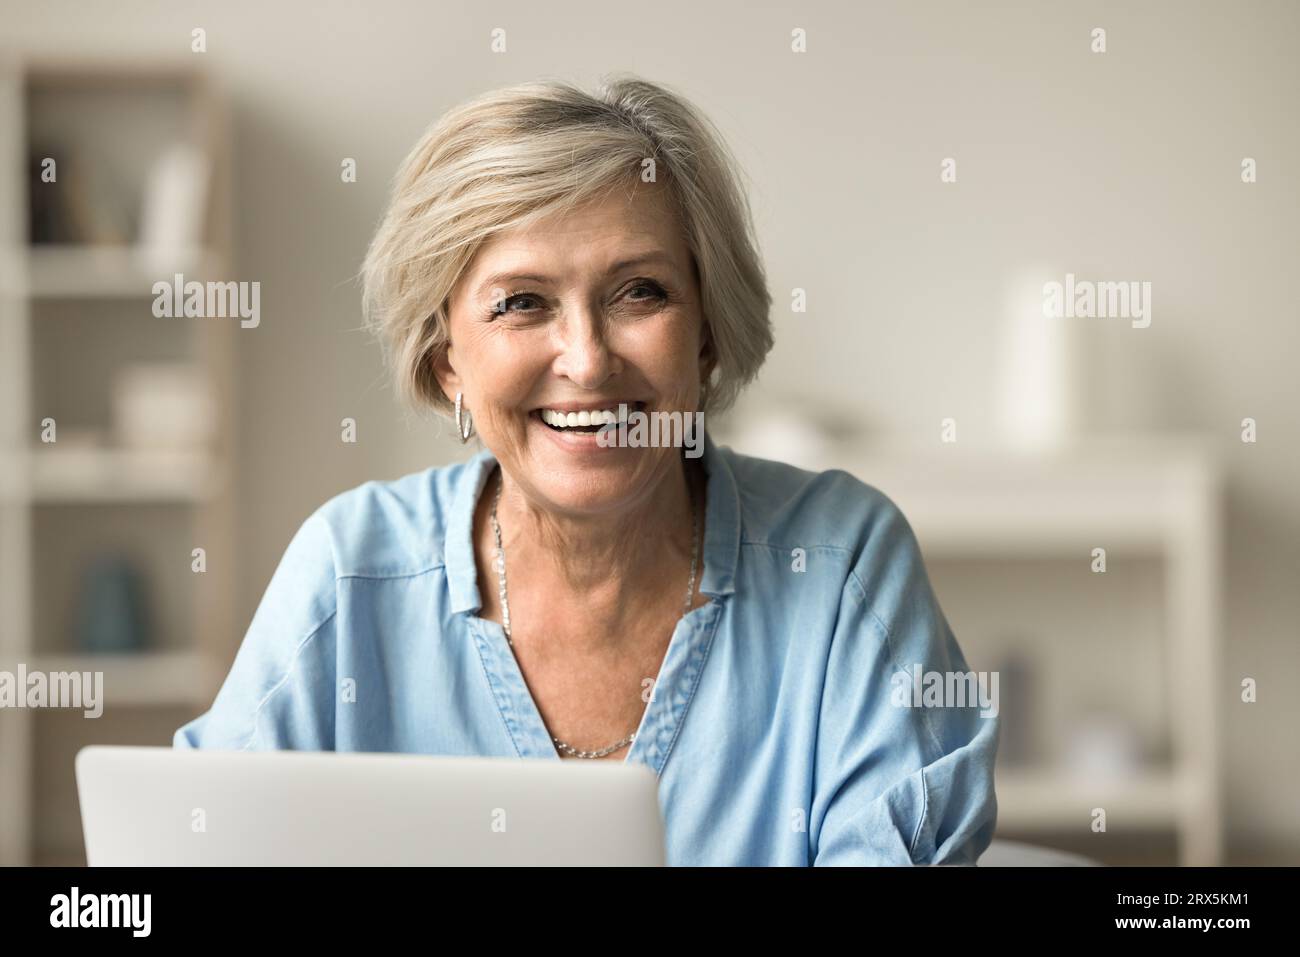 Beautiful Portrait of Pretty and Sweet Senior Mature Woman in Middle Age  Around 70 Years Old Smiling Happy and Friendly at Home Stock Image - Image  of camera, people: 107266683